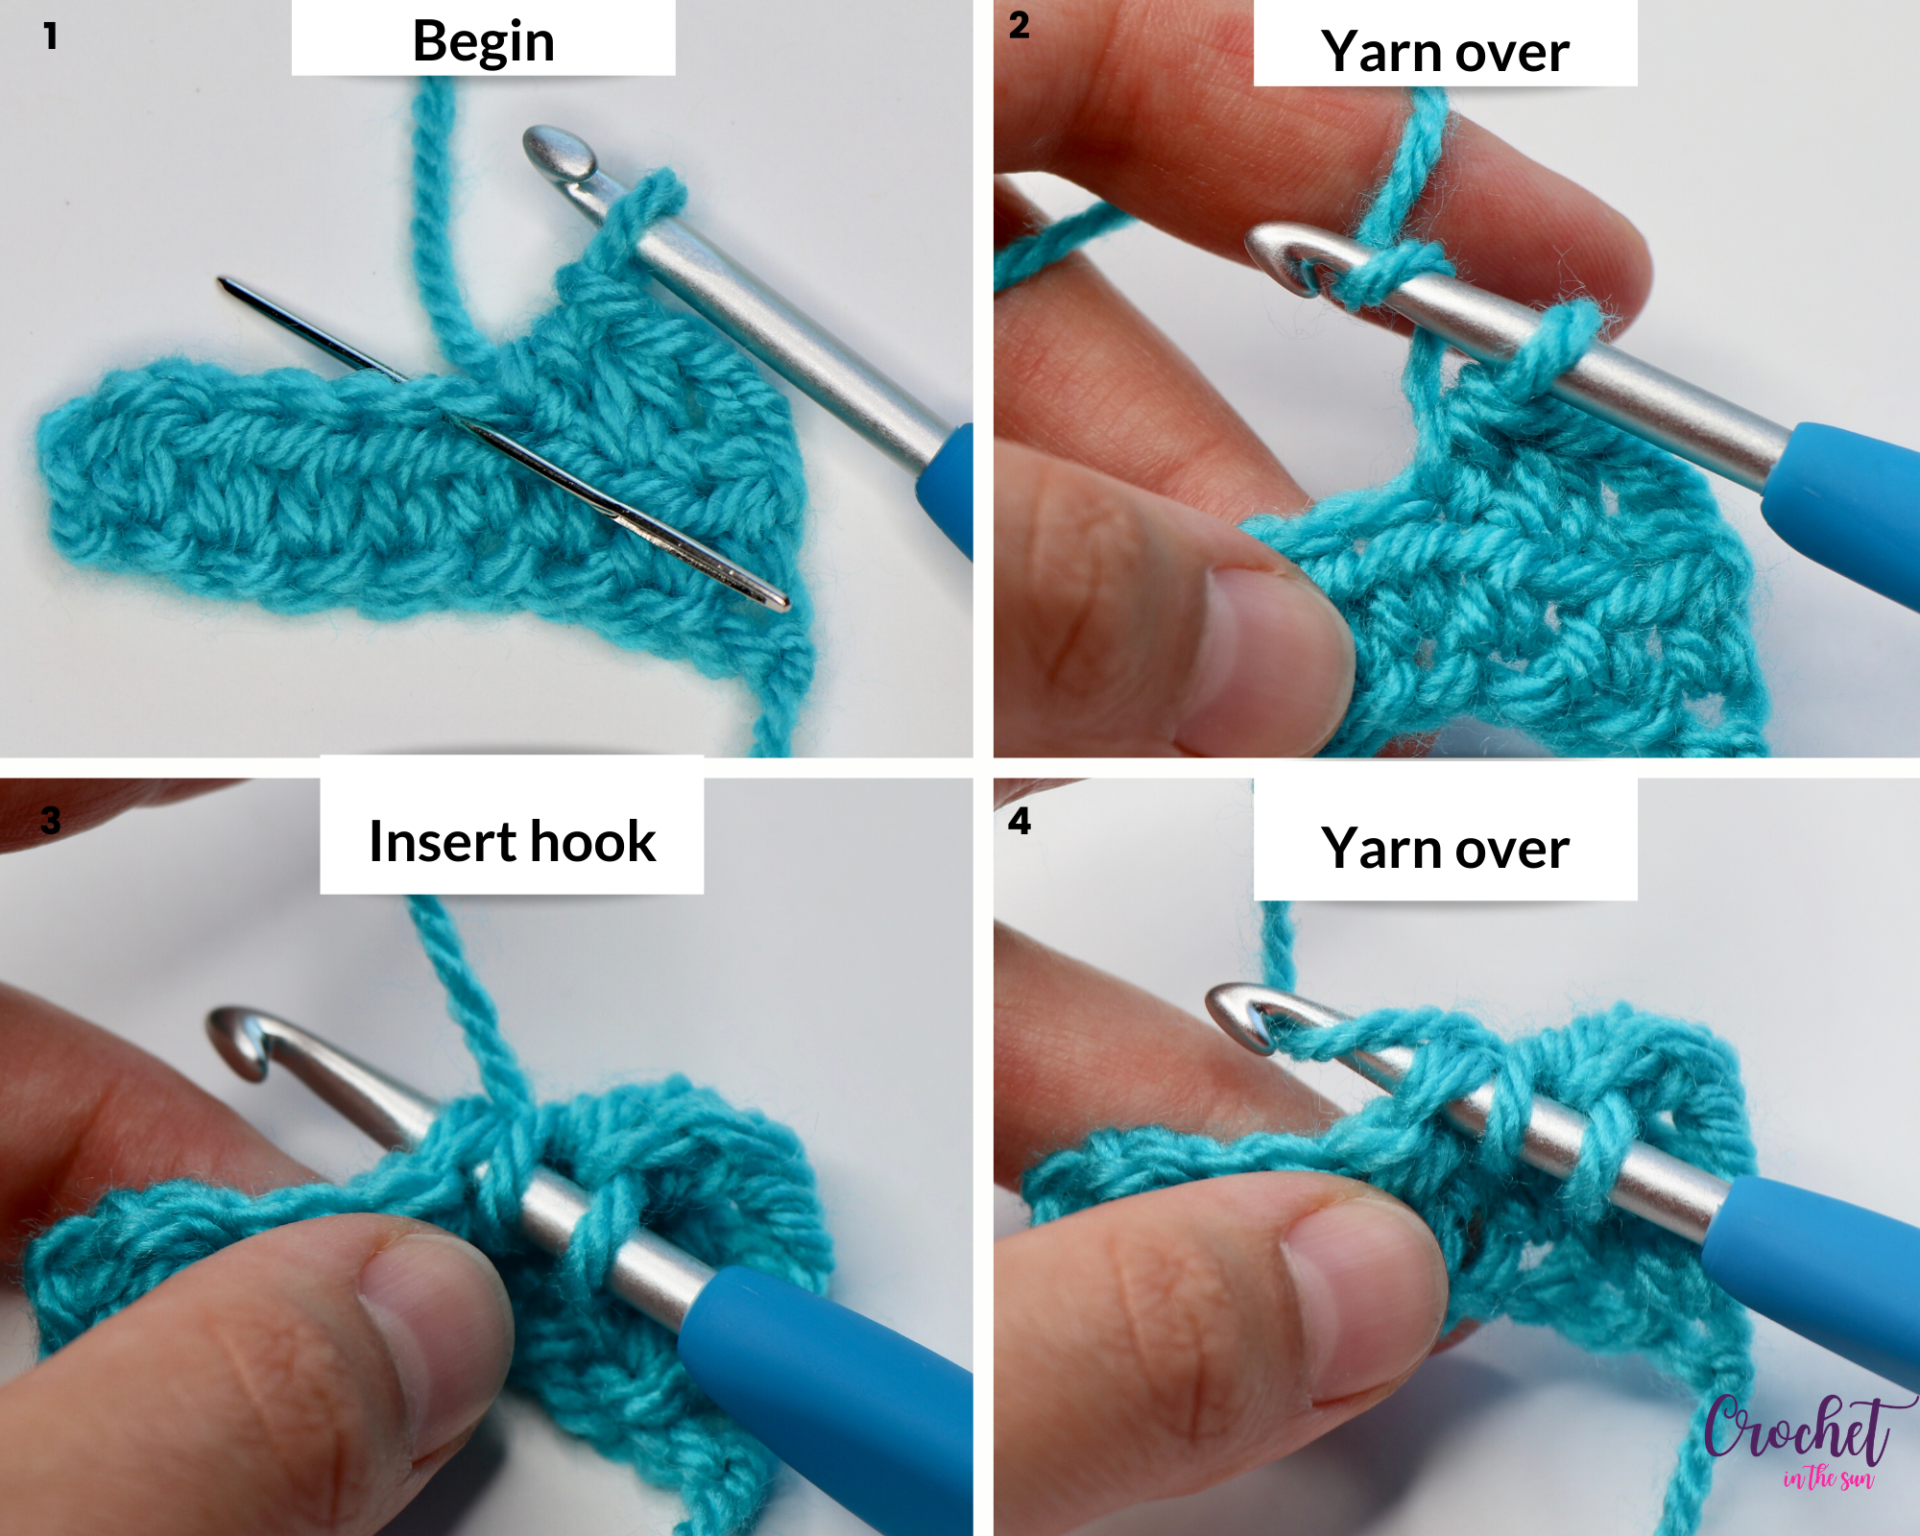 How to crochet - Part 1: step by step photo tutorial for the half double crochet stitch (hdc). Beginner friendly tutorial. Part of the Ultimate Beginner's Guide to crochet #howtocrochet #crochetforbeginners